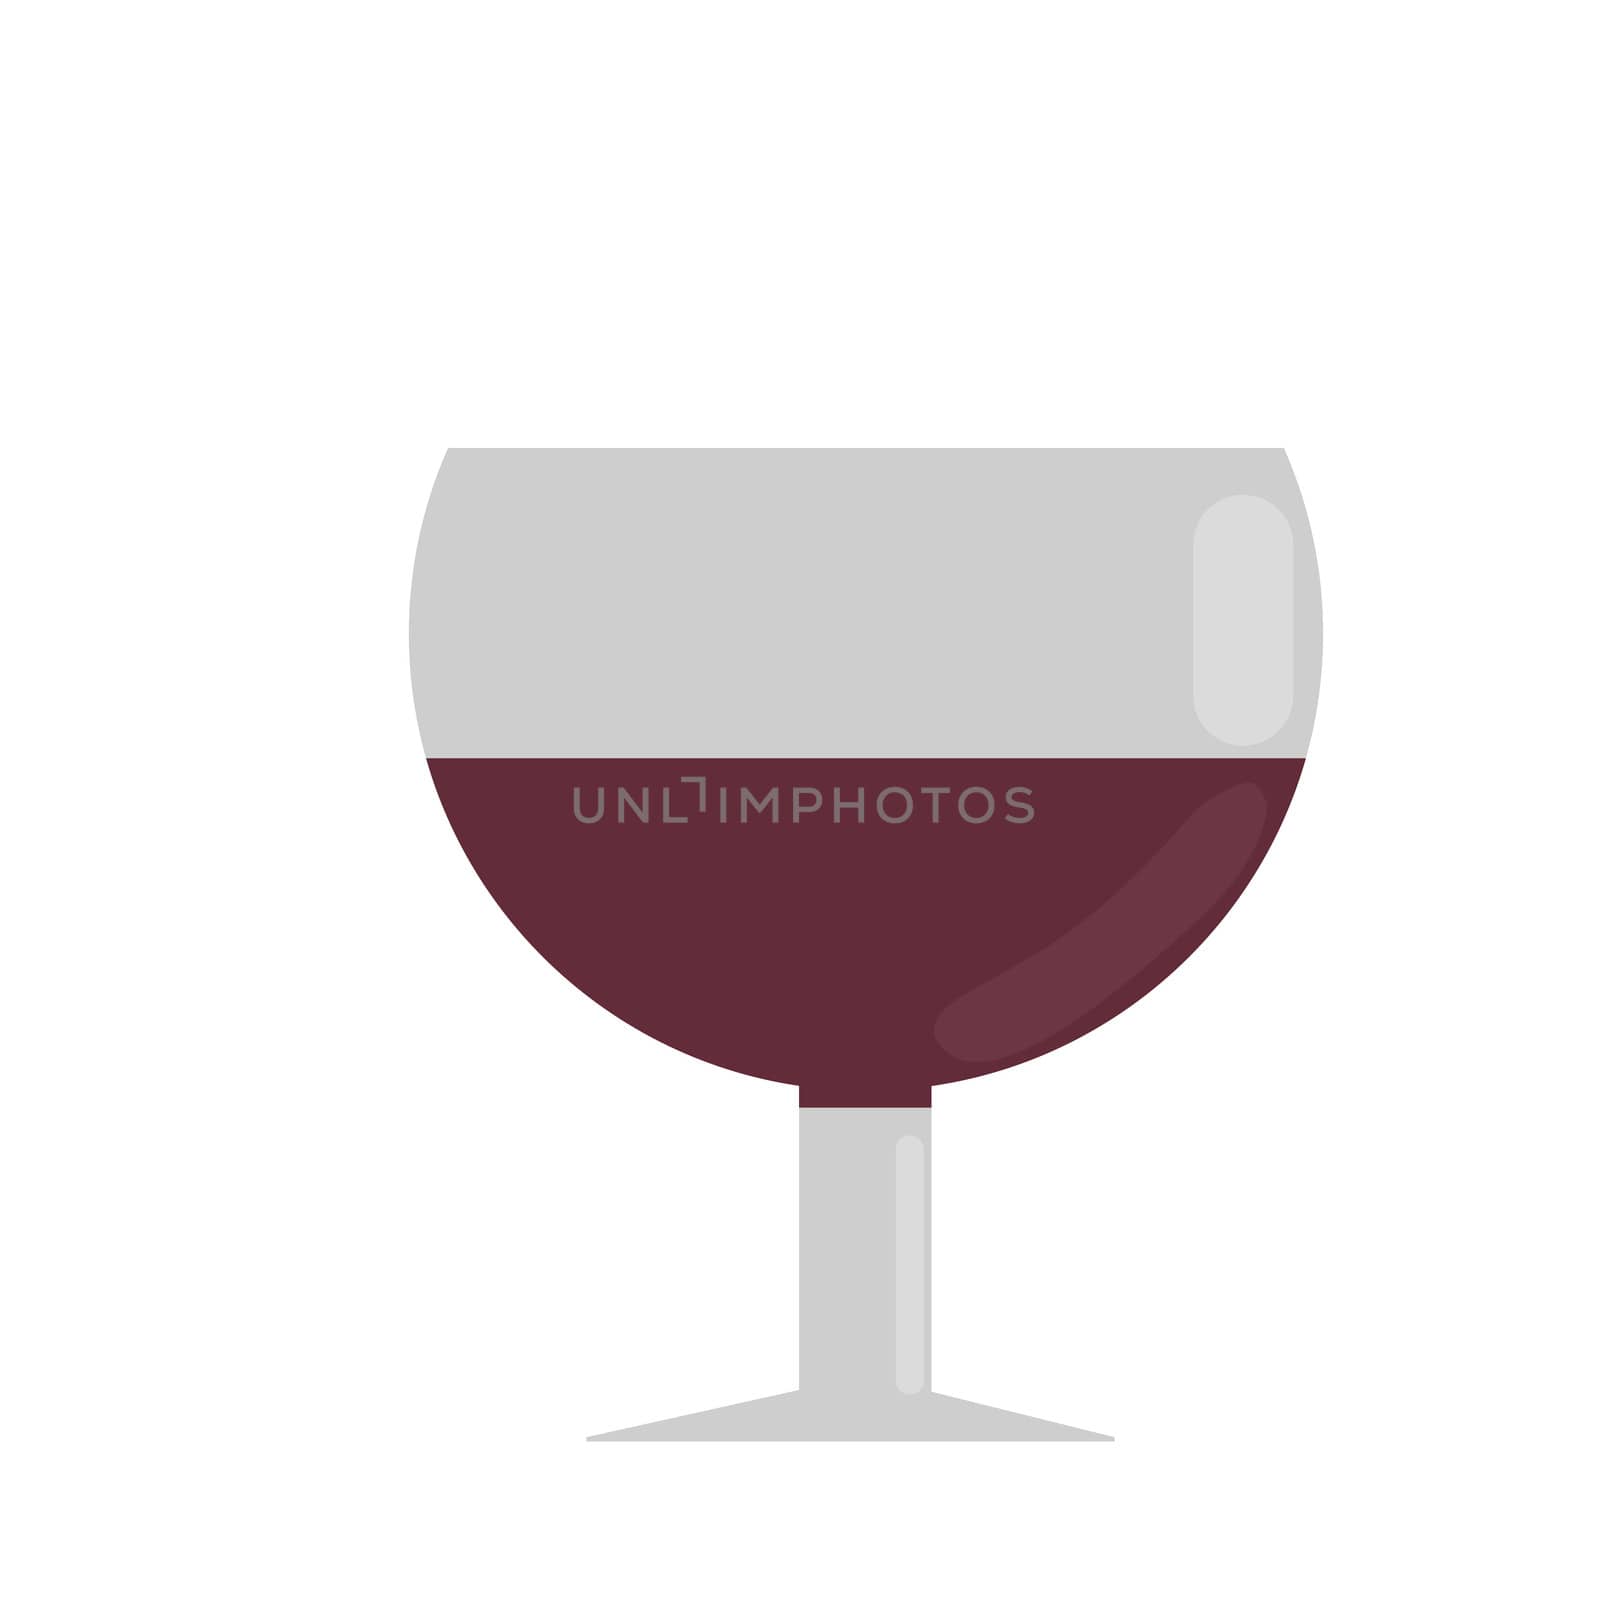 a glass of red wine. illustration in flat style.